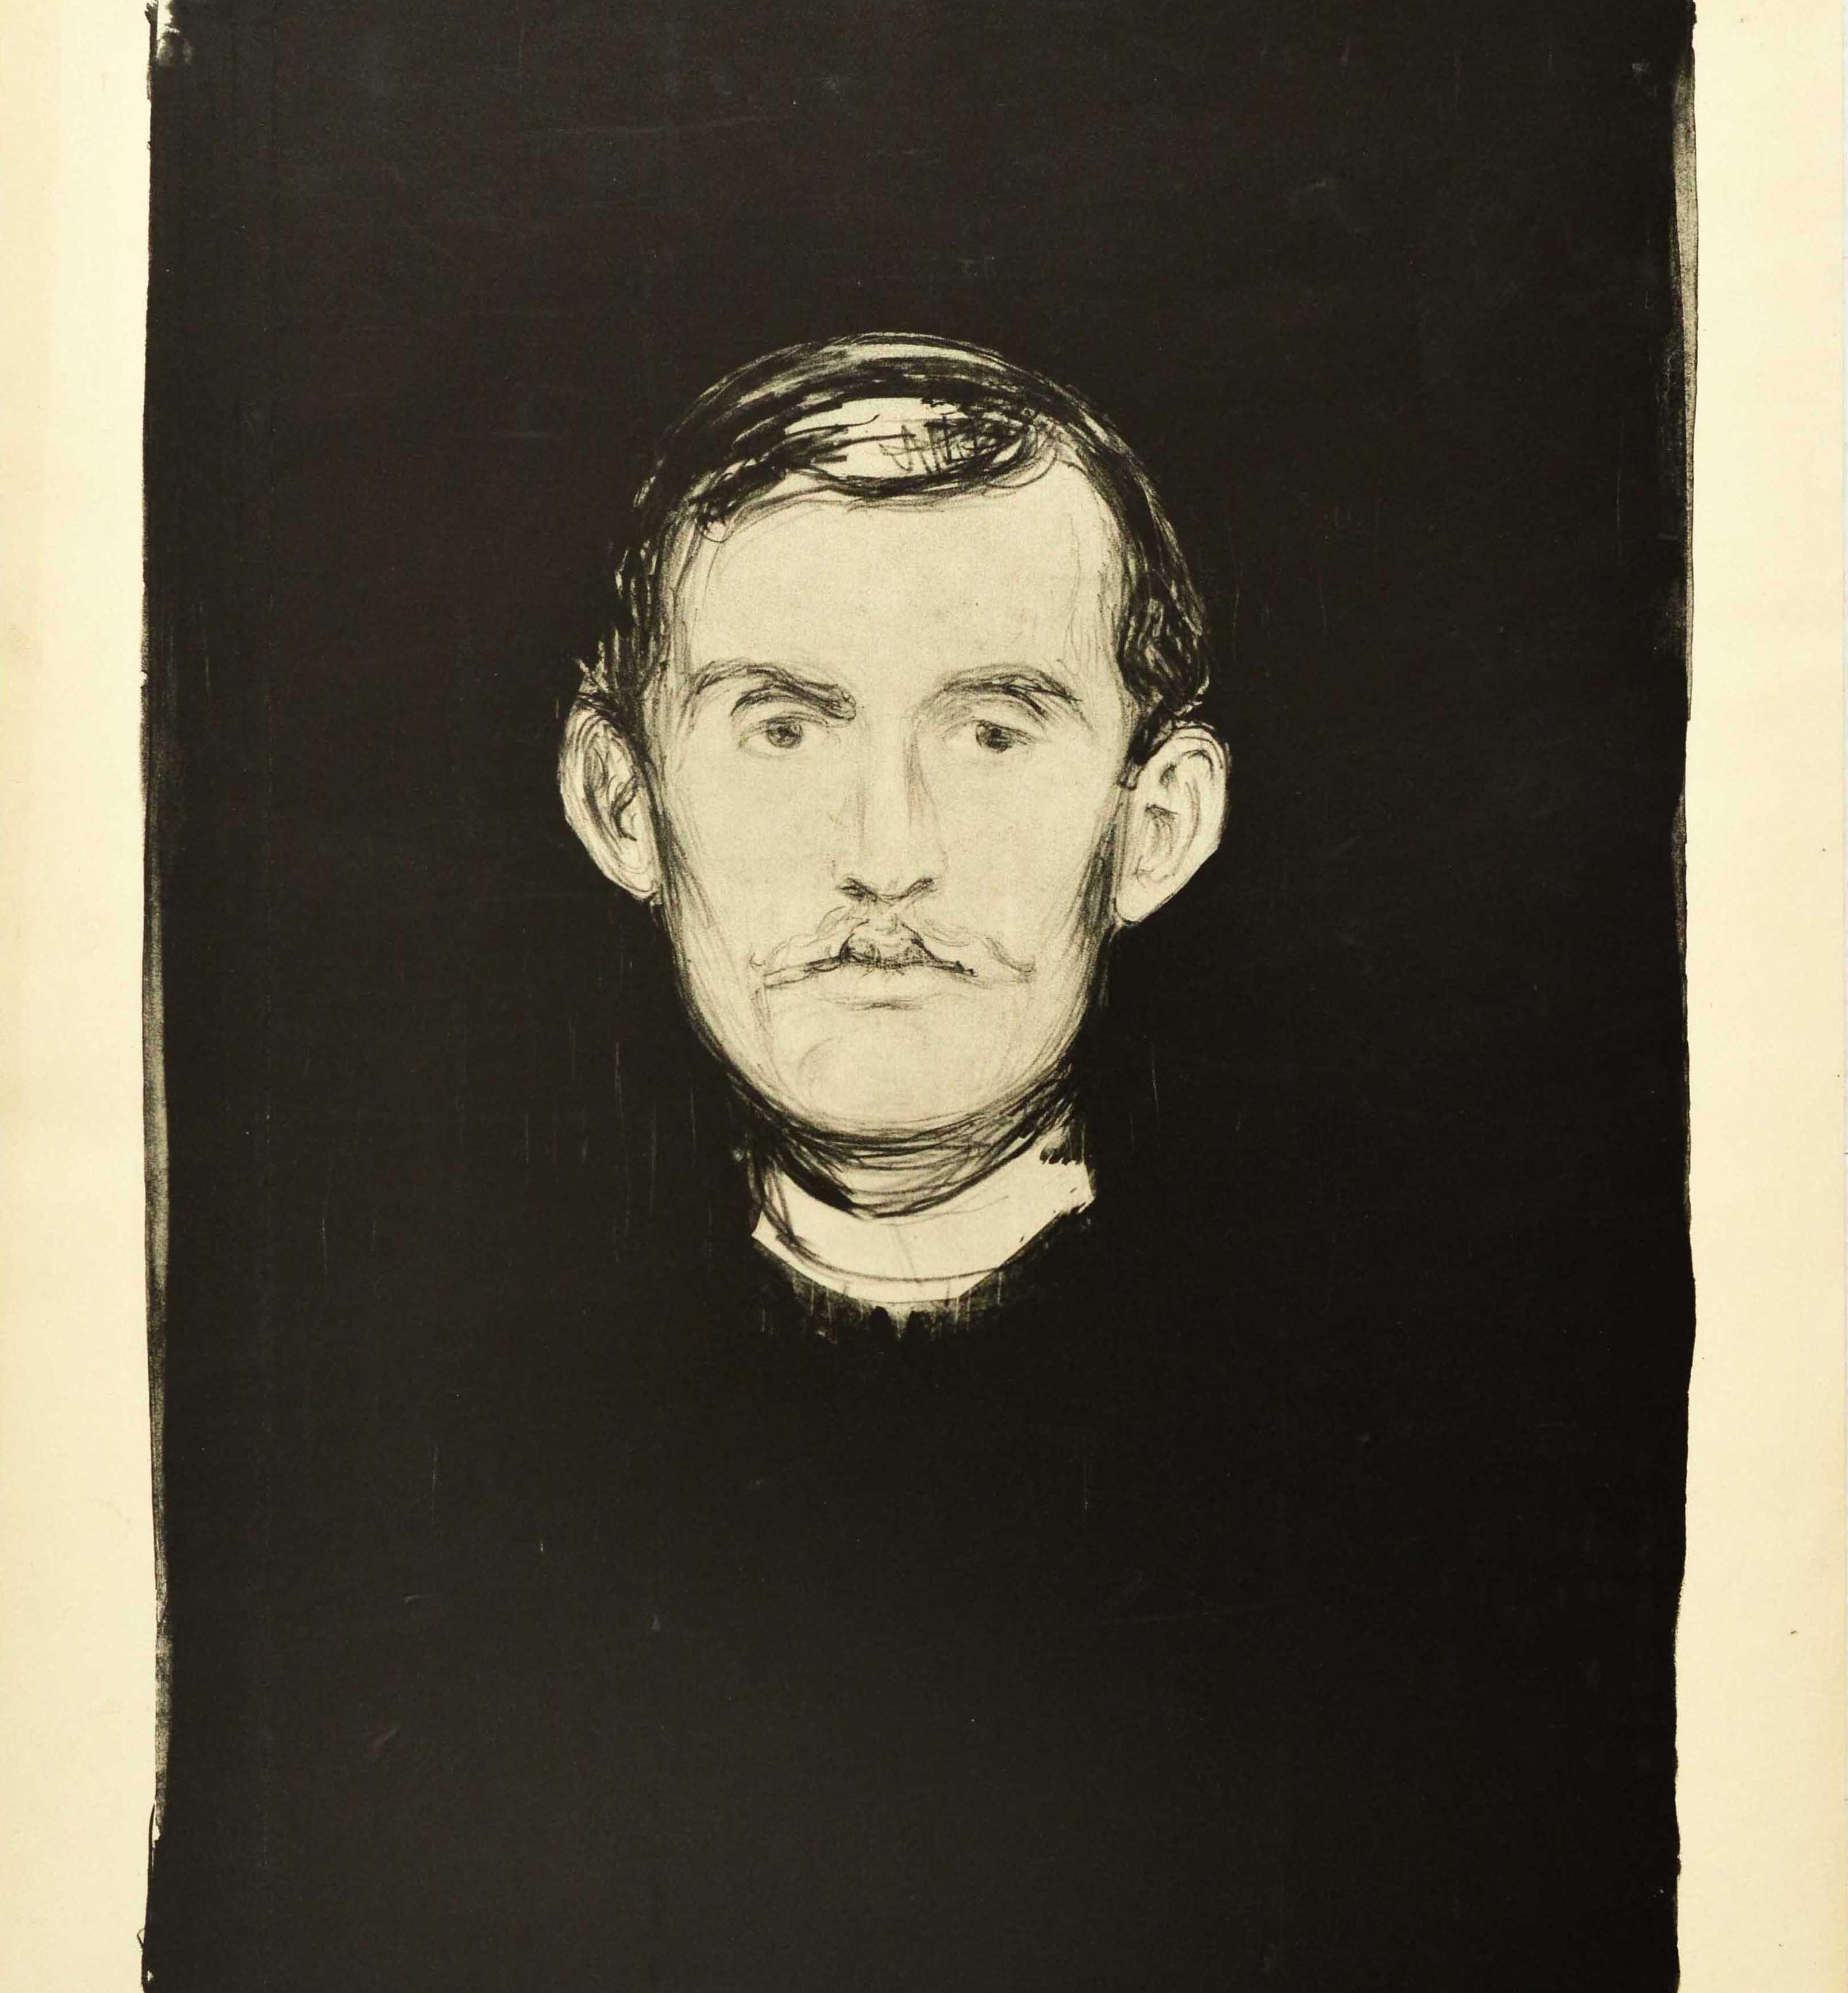 Original vintage advertising poster for an Edvard Munch exhibition held at the Haus der Kunst museum in Munich from 12 November to 19 December featuring Munch's 1895 needle and ink self-portrait depicting himself looking at the viewer set over a